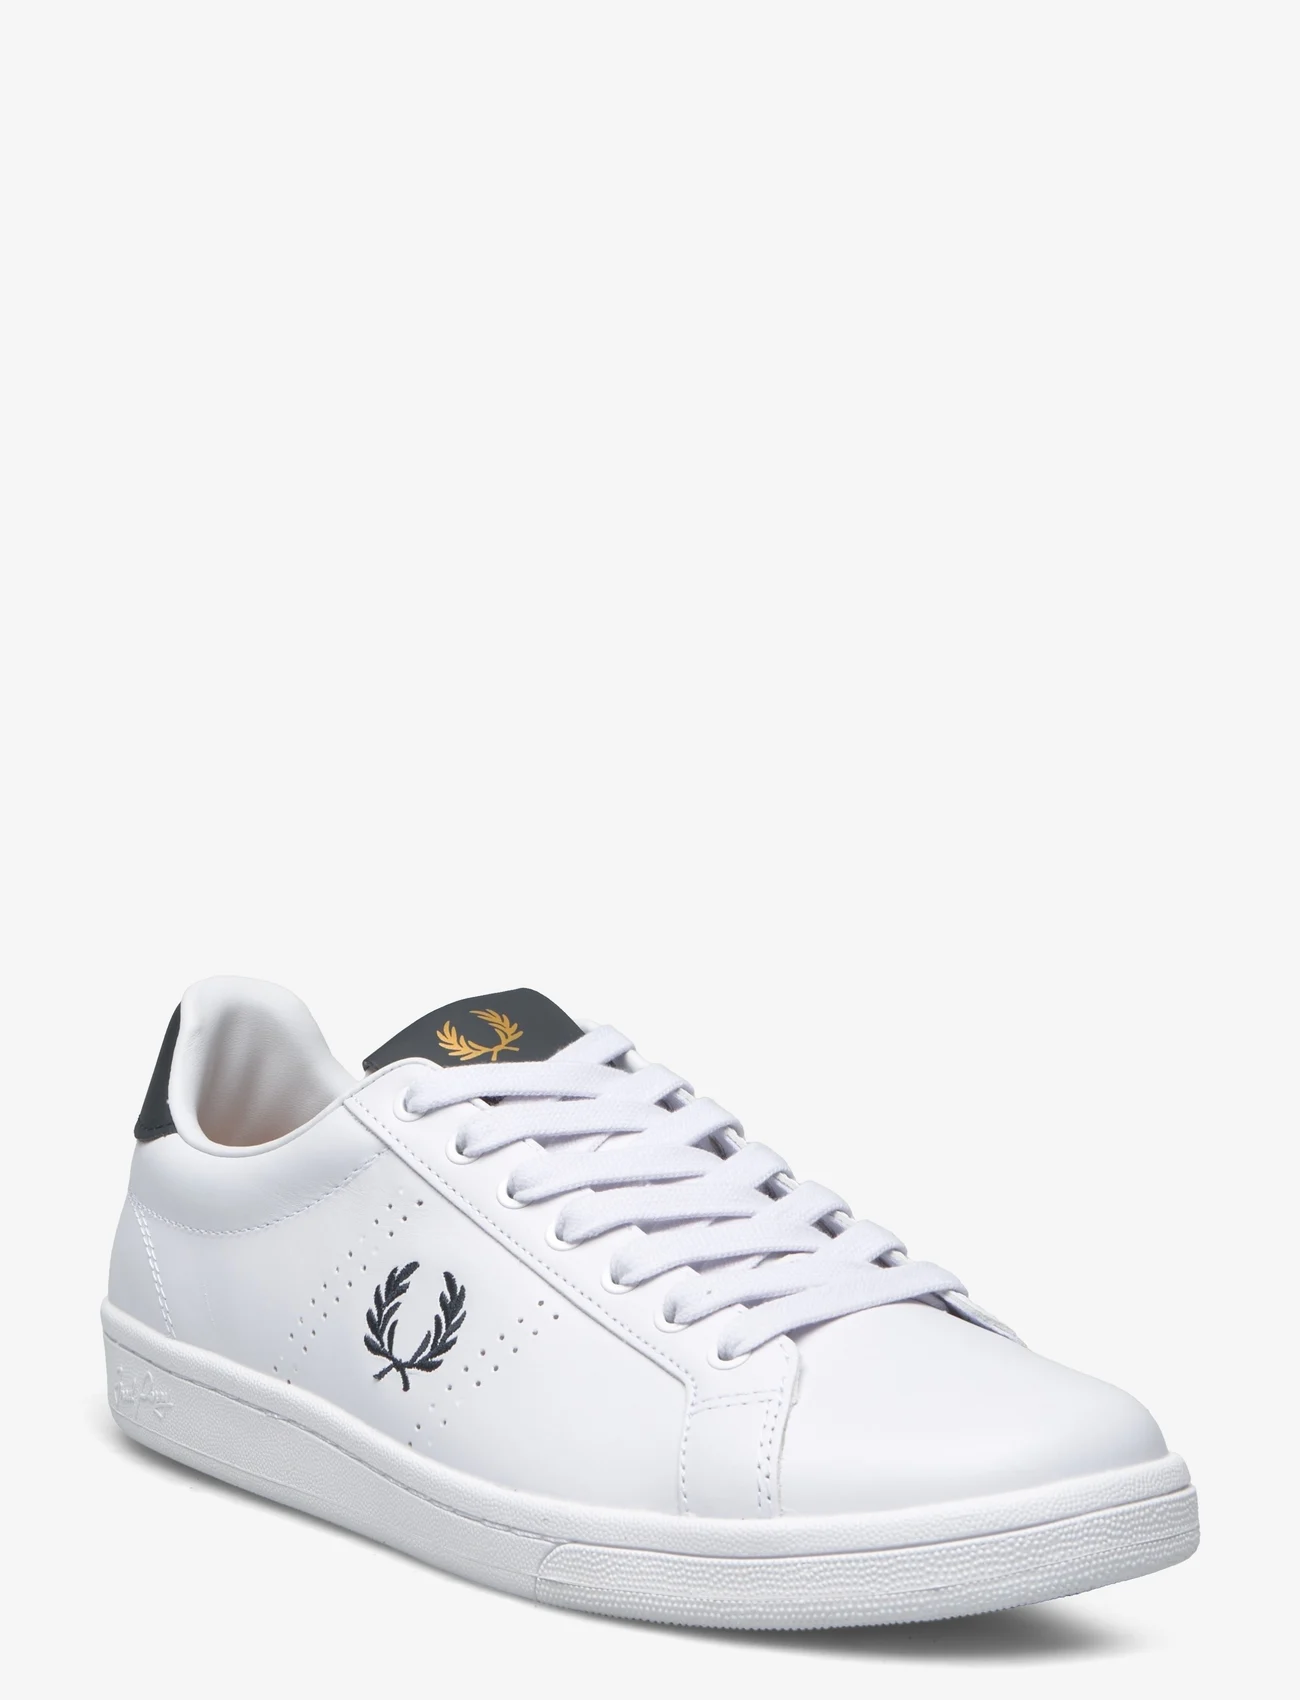 Fred Perry - B721 LEATHER - low tops - white - 0